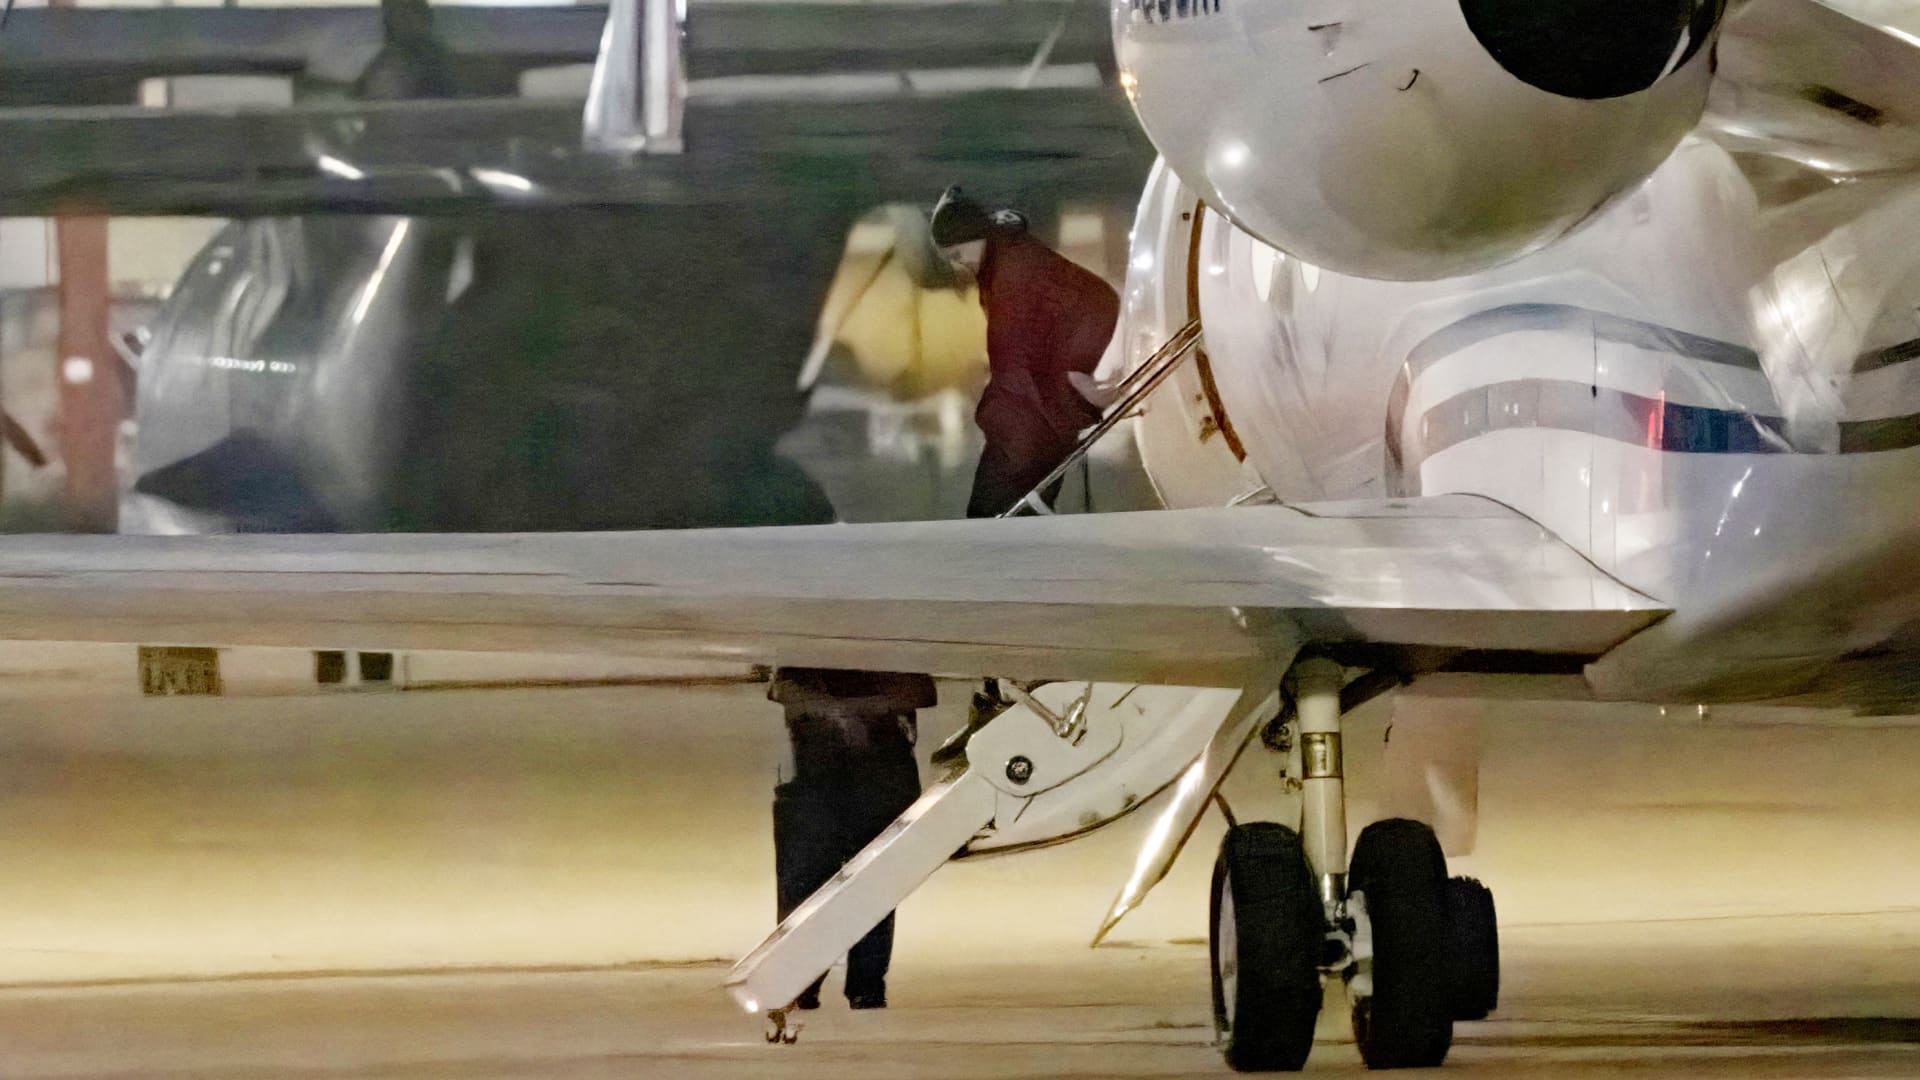 American basketball star Brittney Griner gets out of a plane after landing at the JBSA-Kelly Field Annex runway on December 9, 2022 in San Antonio, after she was released from a Russian prison in exchange for a notorious arms dealer.